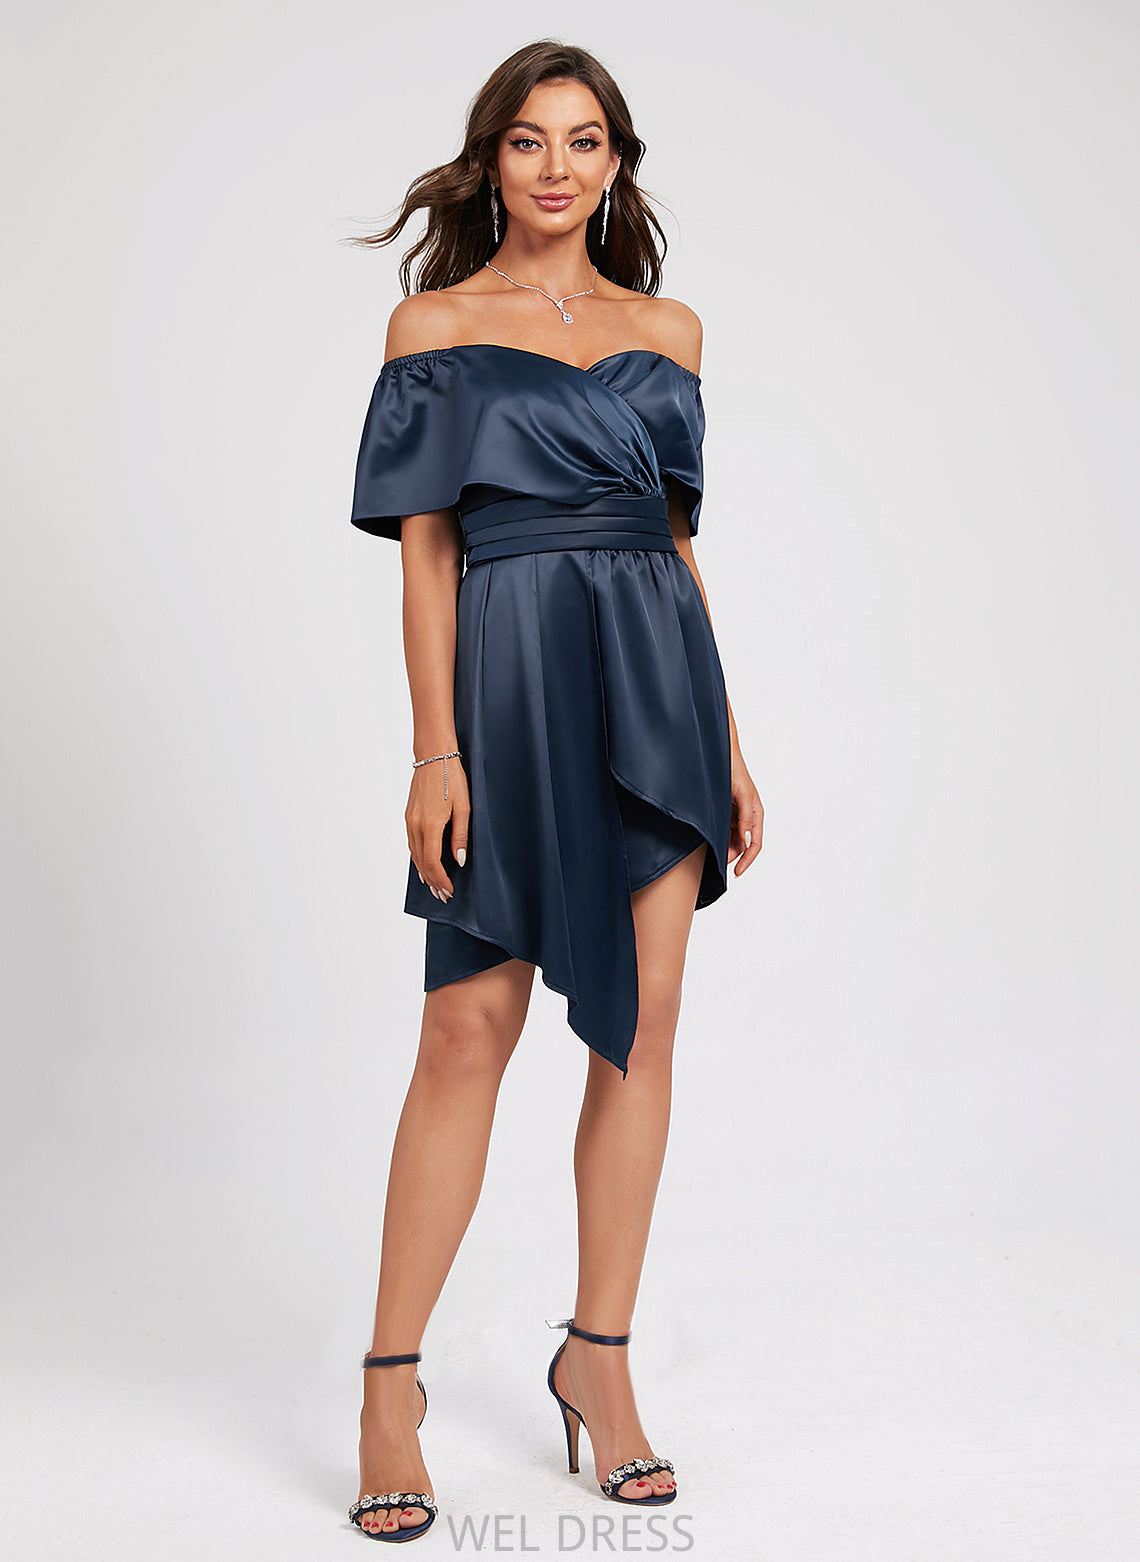 Homecoming Dresses Dress Sheath/Column With Off-the-Shoulder Brenna Homecoming Pleated Asymmetrical